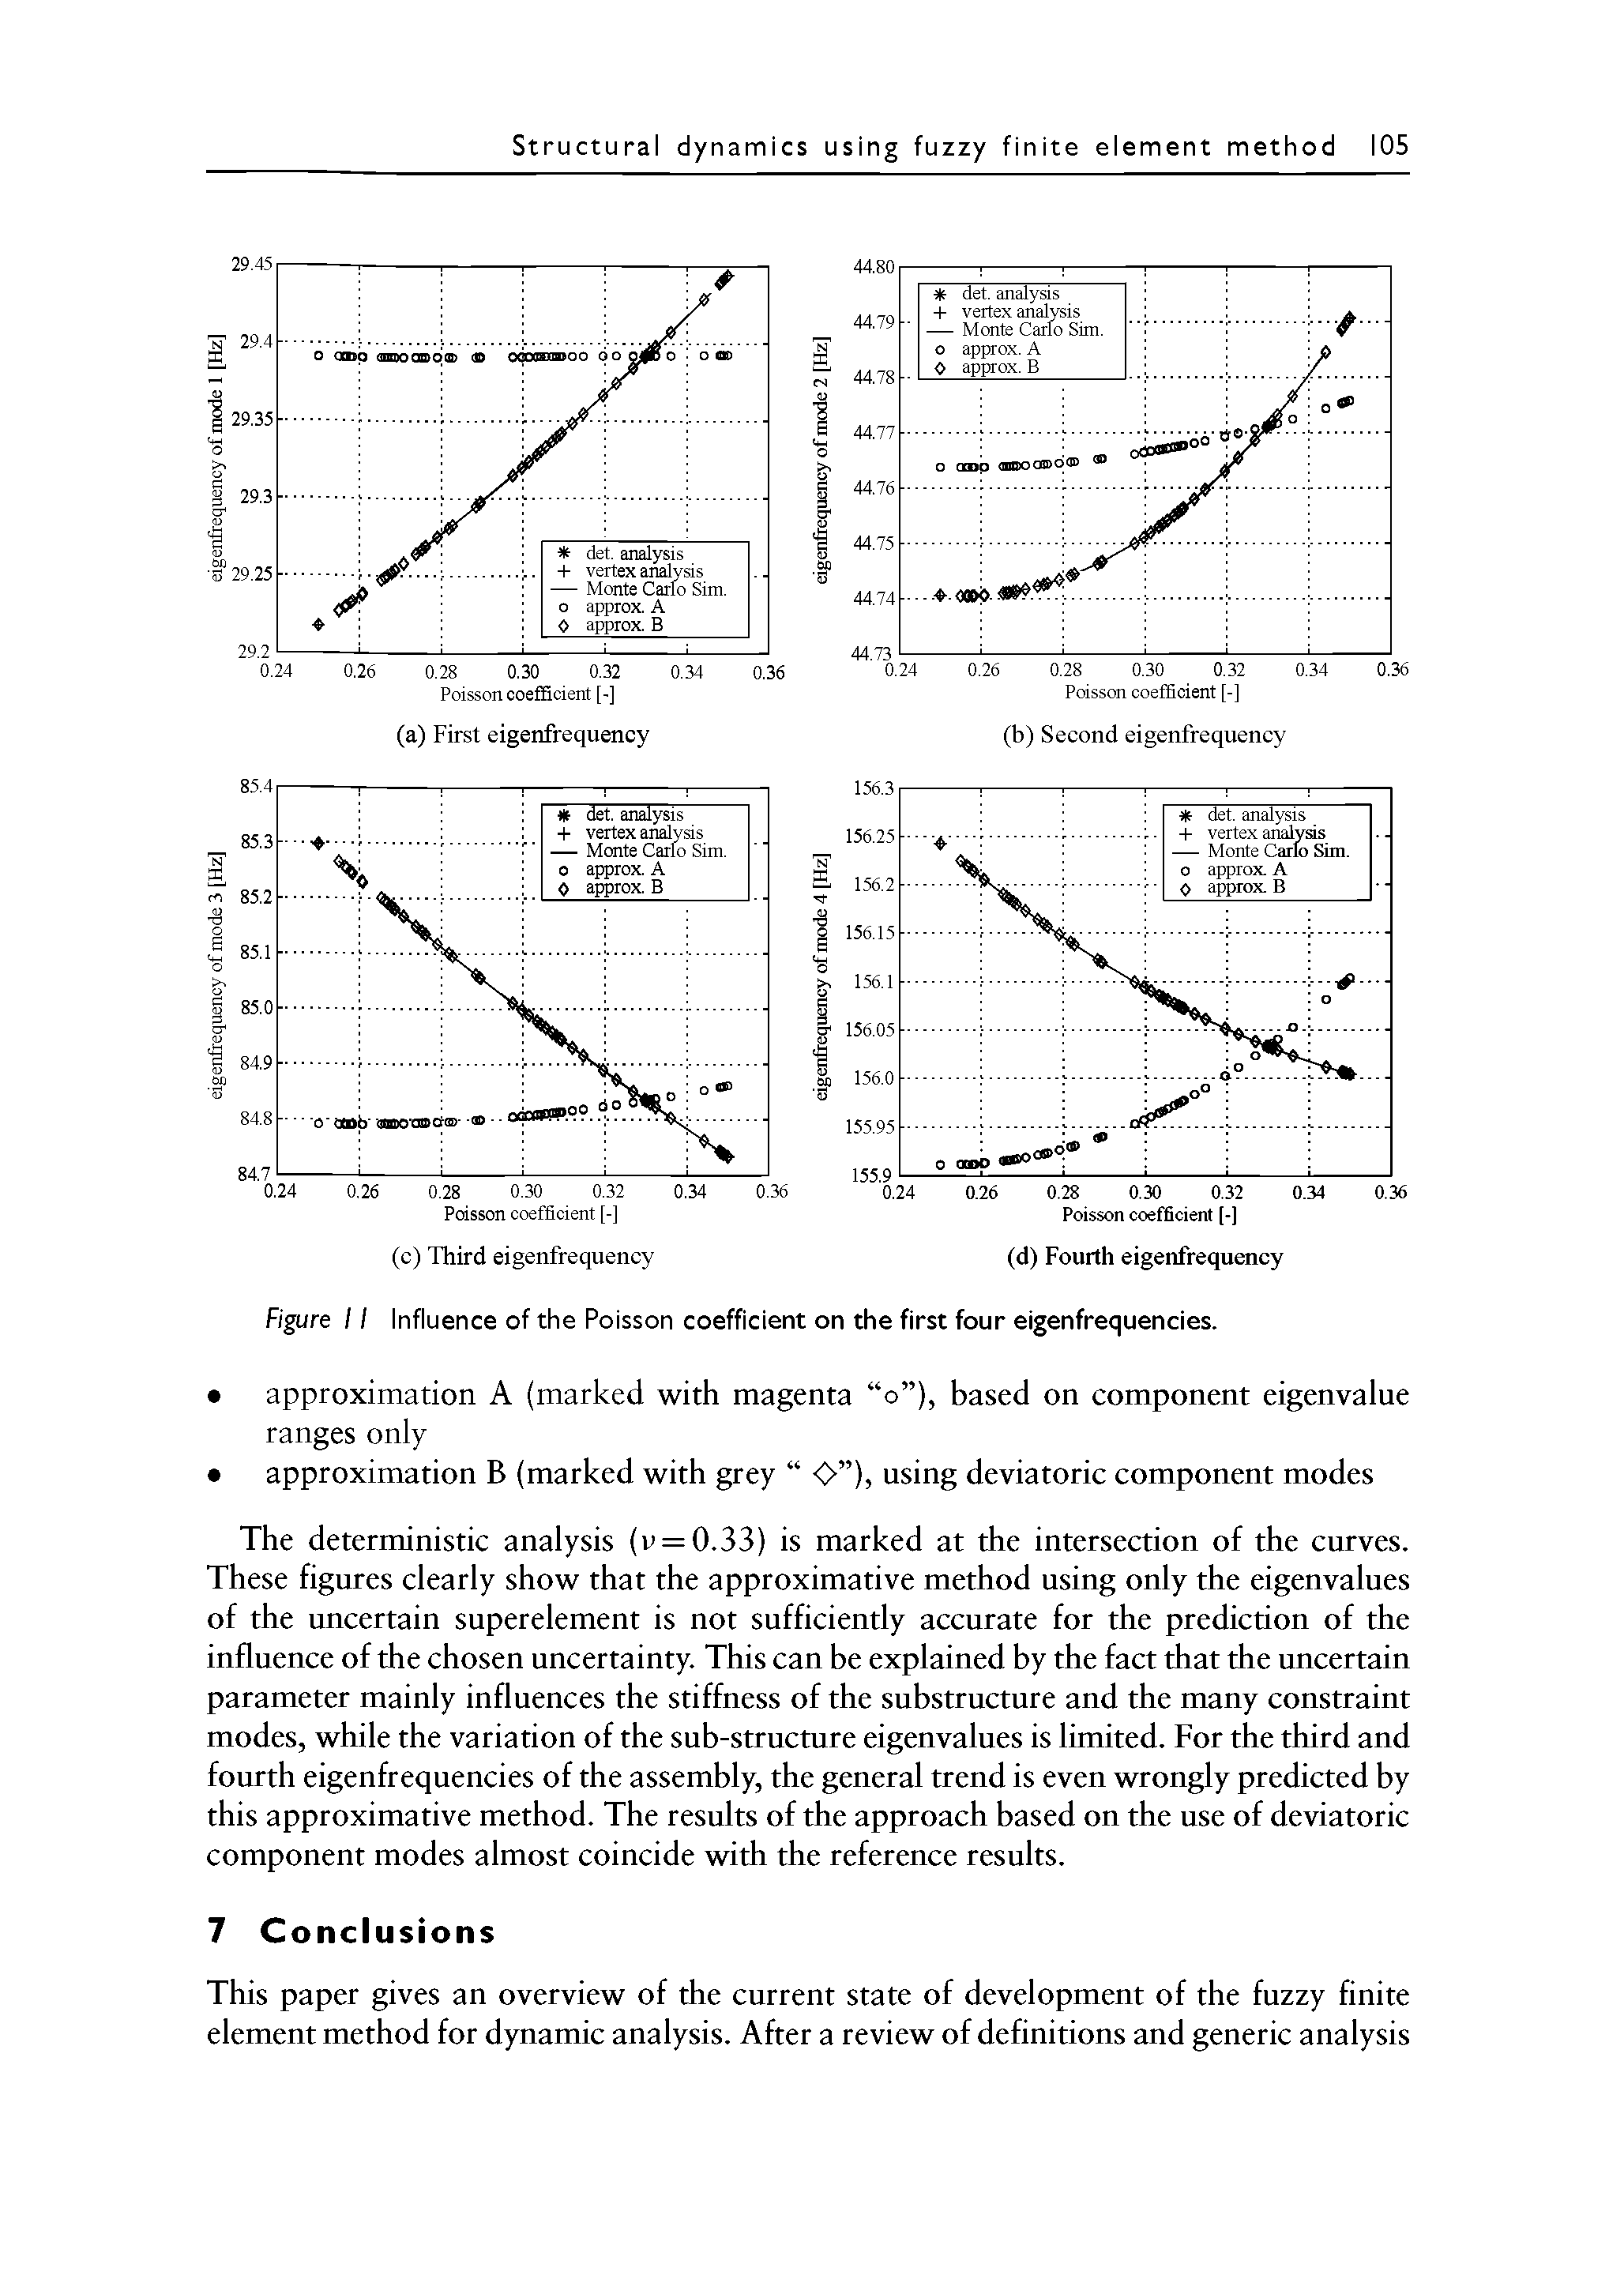 Figure 11 Influence of the Poisson coefficient on the first four eigenfrequencies.